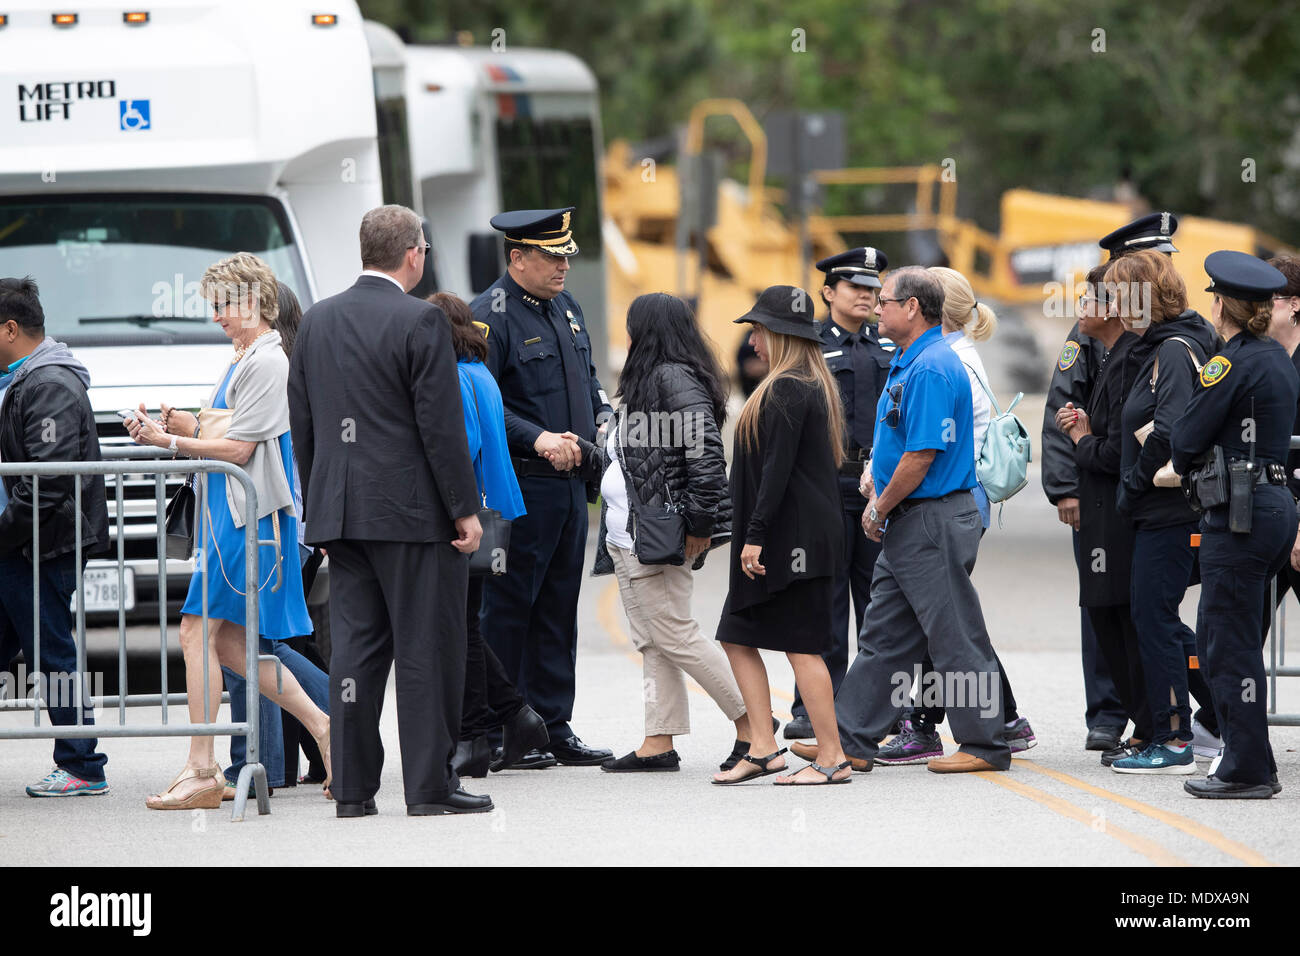 Police help with crowd control as mourners arrive to pay respects to the late former First Lady Barbara Bush at S. Martin's Episcopal Church in Houston Stock Photo